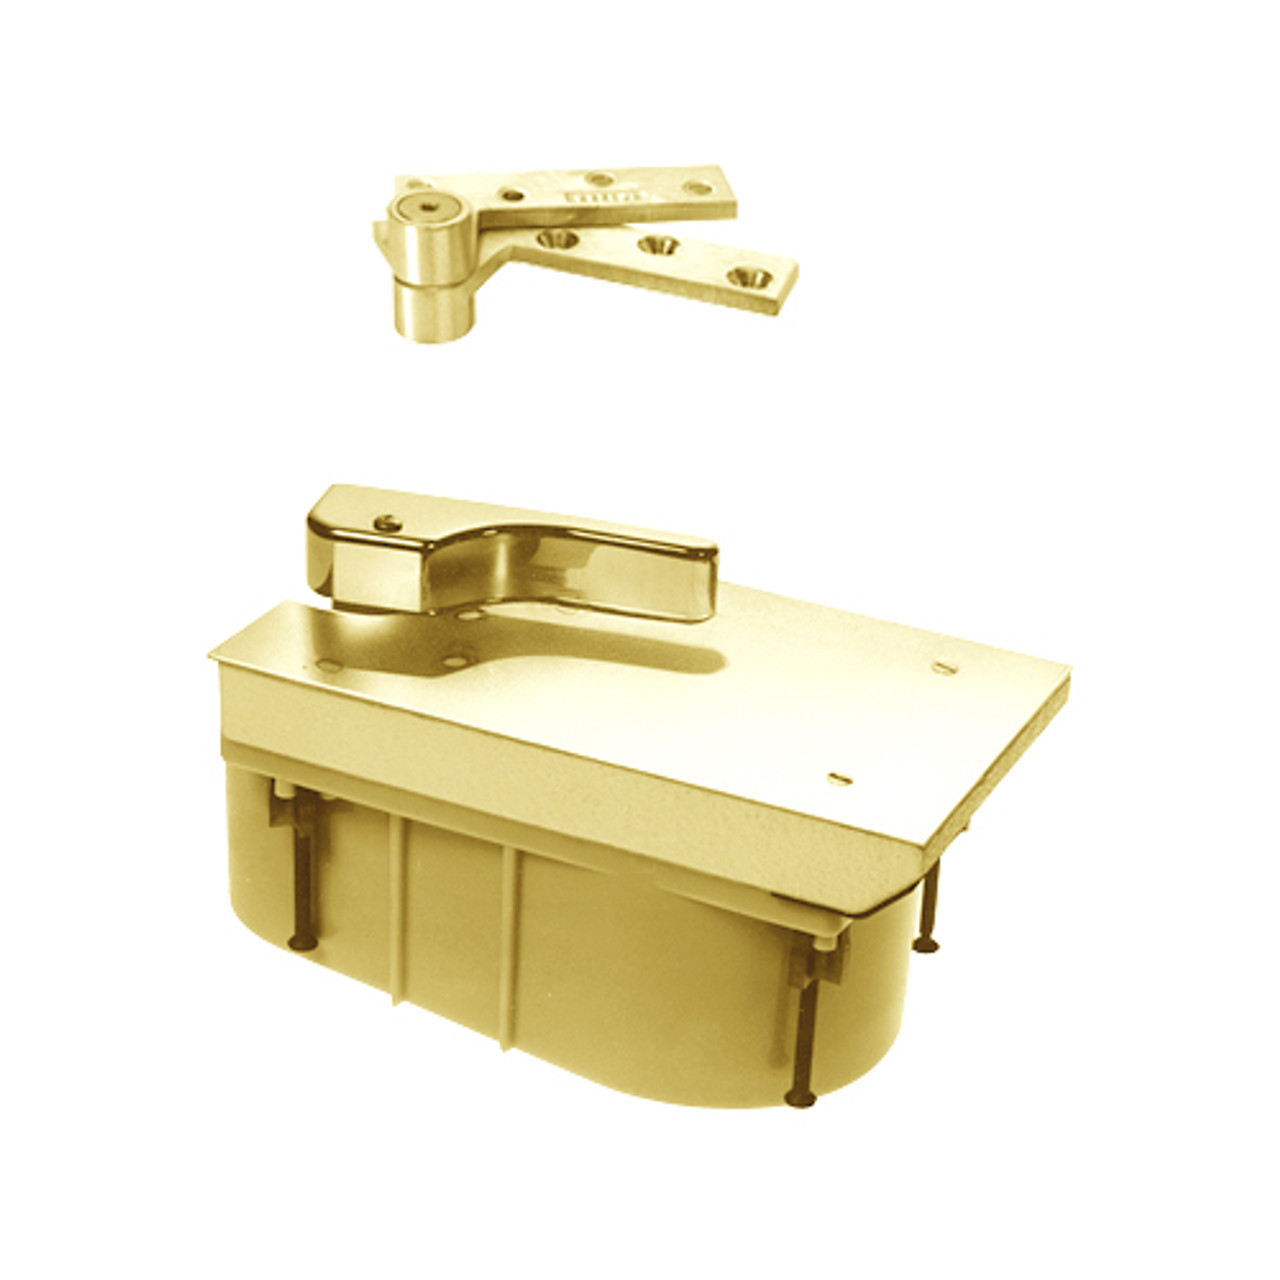 PHQT27-90S-LH-605 Rixson 27 Series Heavy Duty Quick Install Offset Hung Floor Closer in Bright Brass Finish